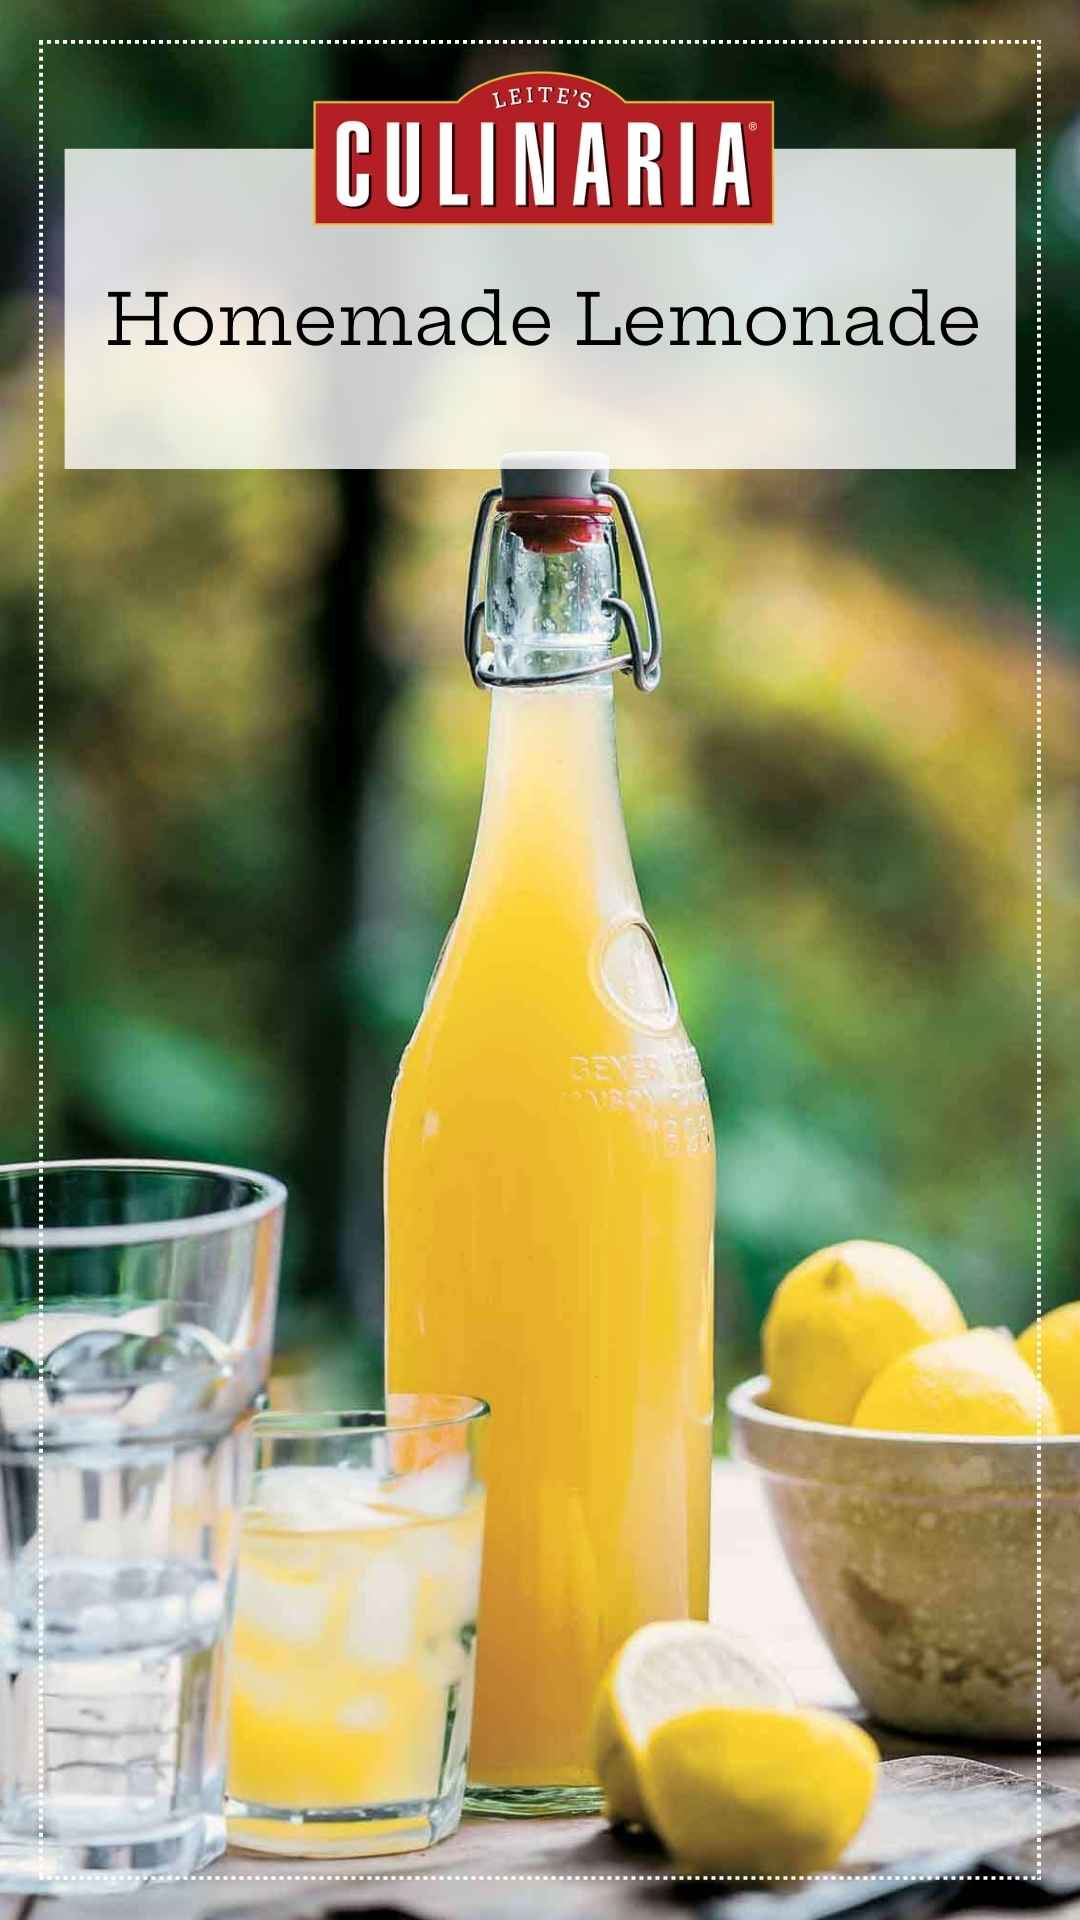 A bottle of lemon syrup with fresh lemons and a glass of lemonade nearby.